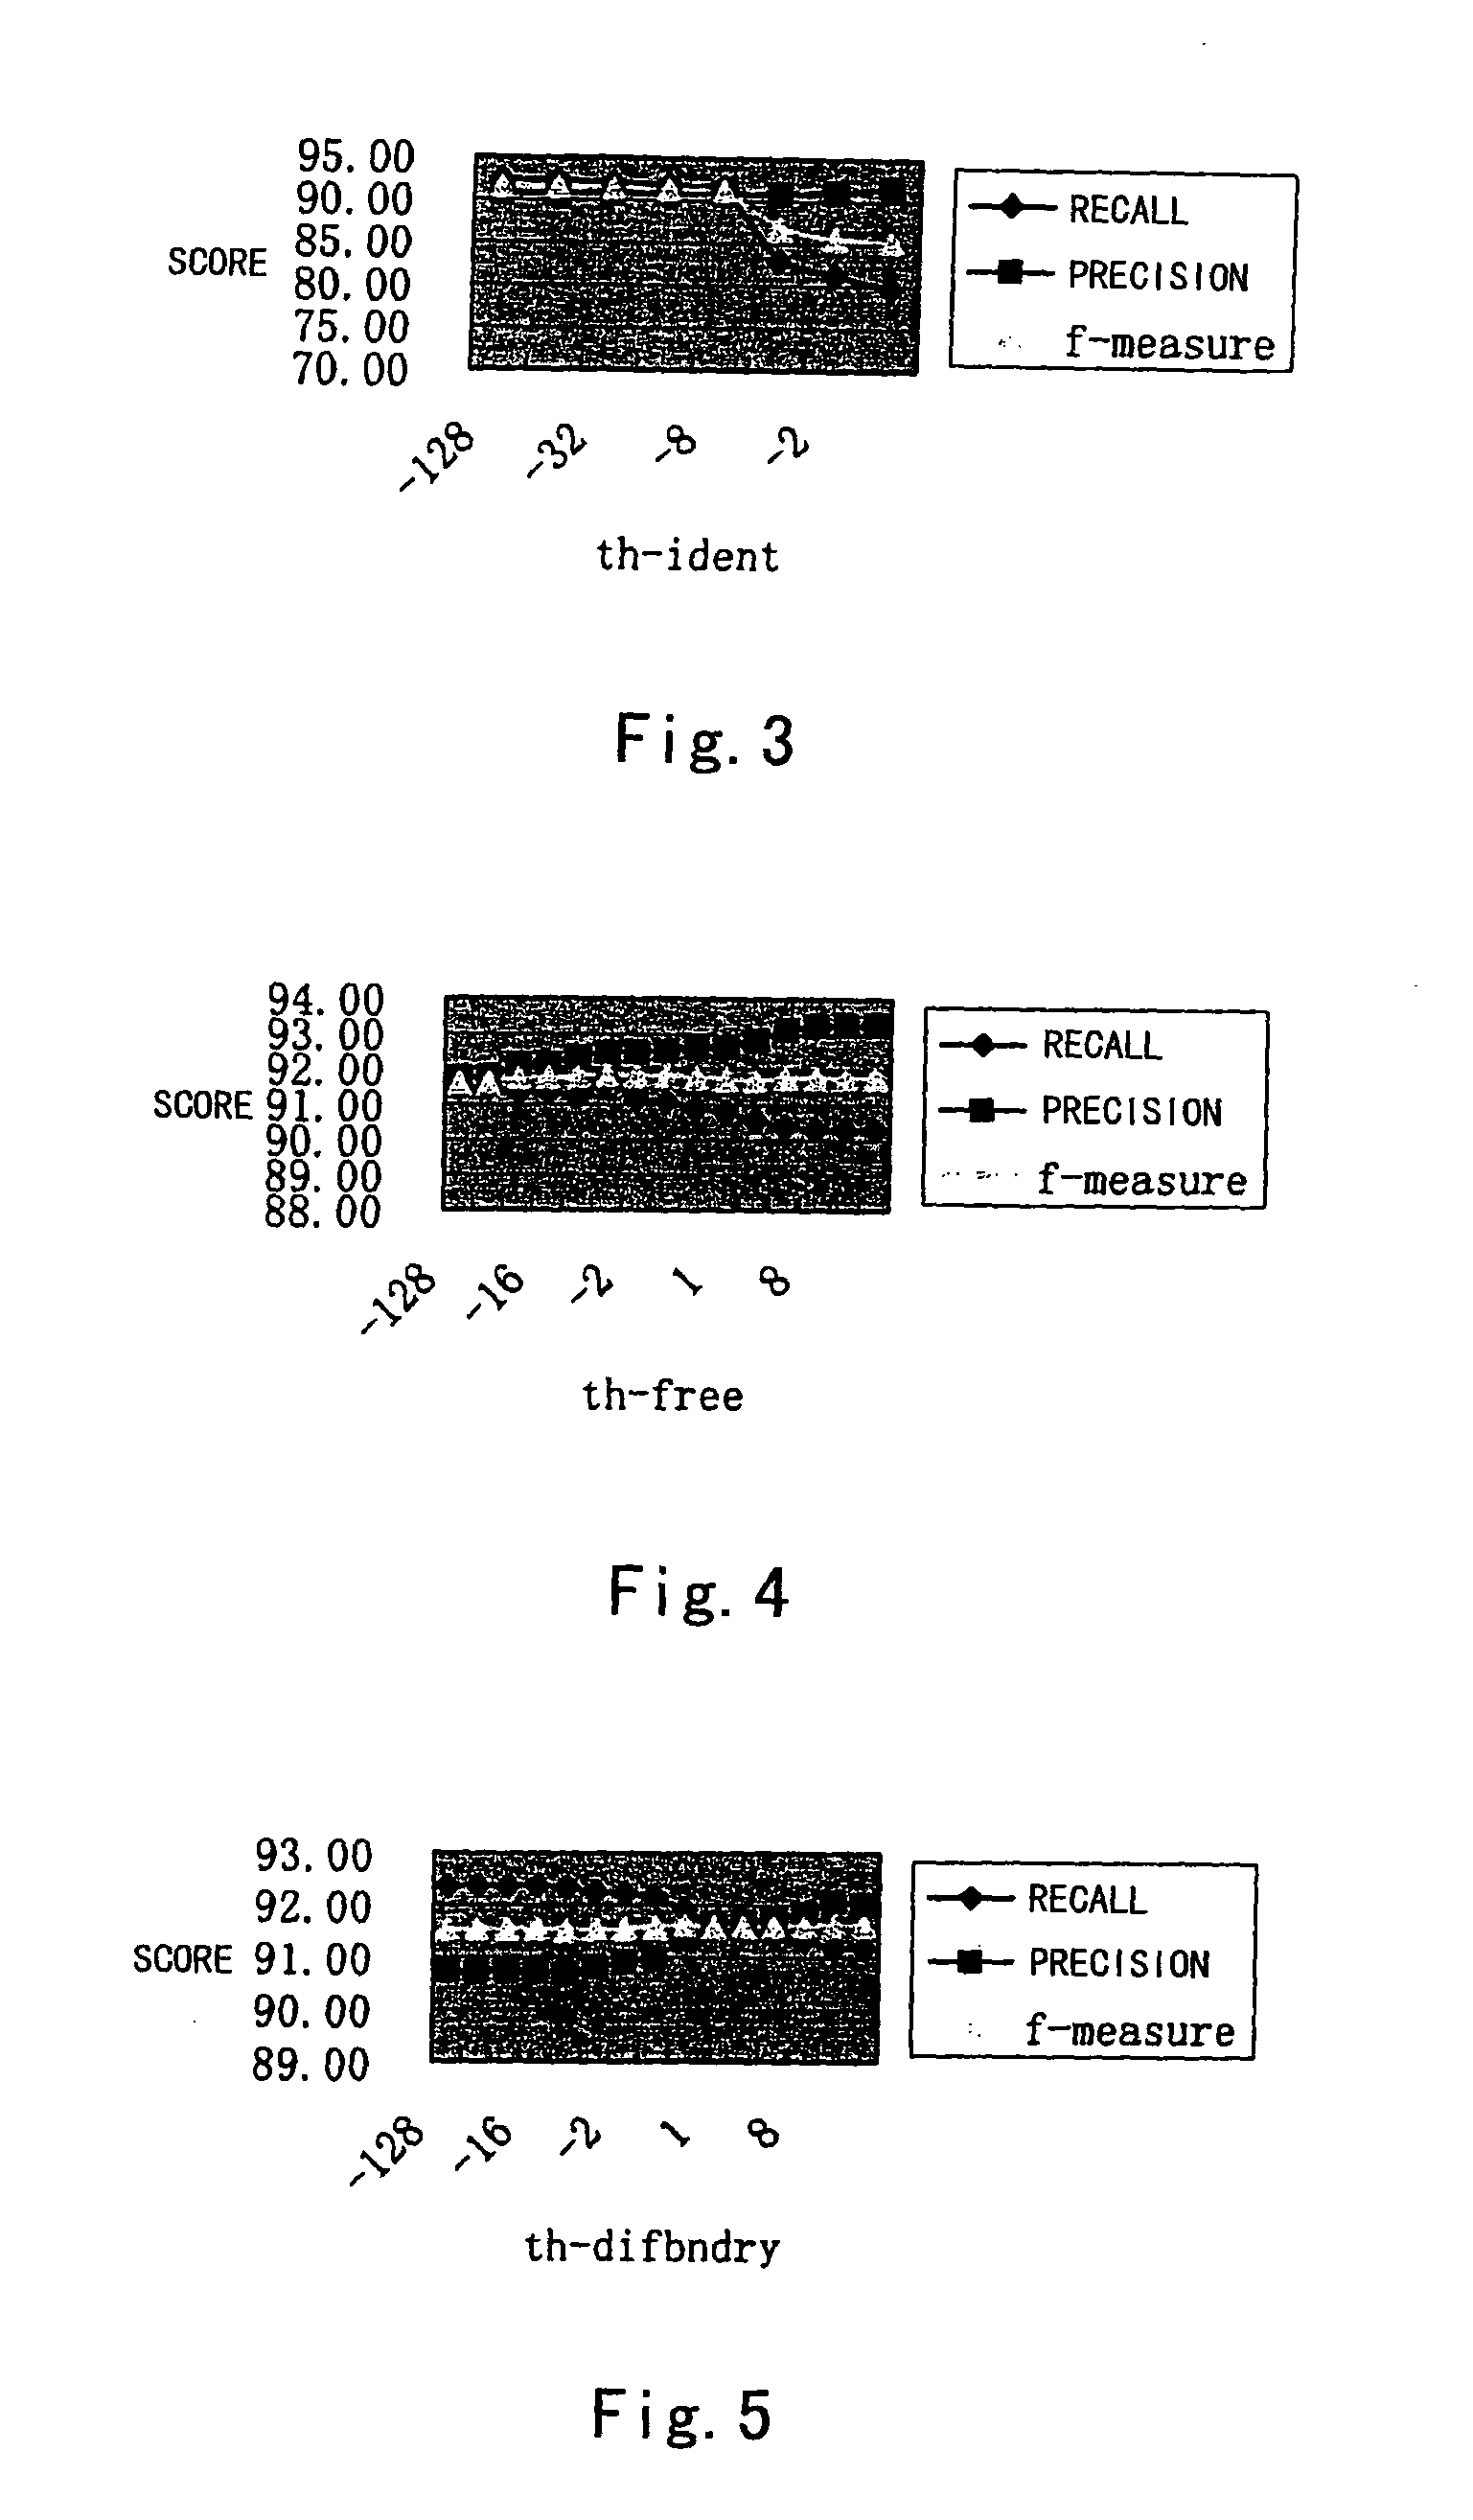 Method and apparatus for named entity recognition in natural language